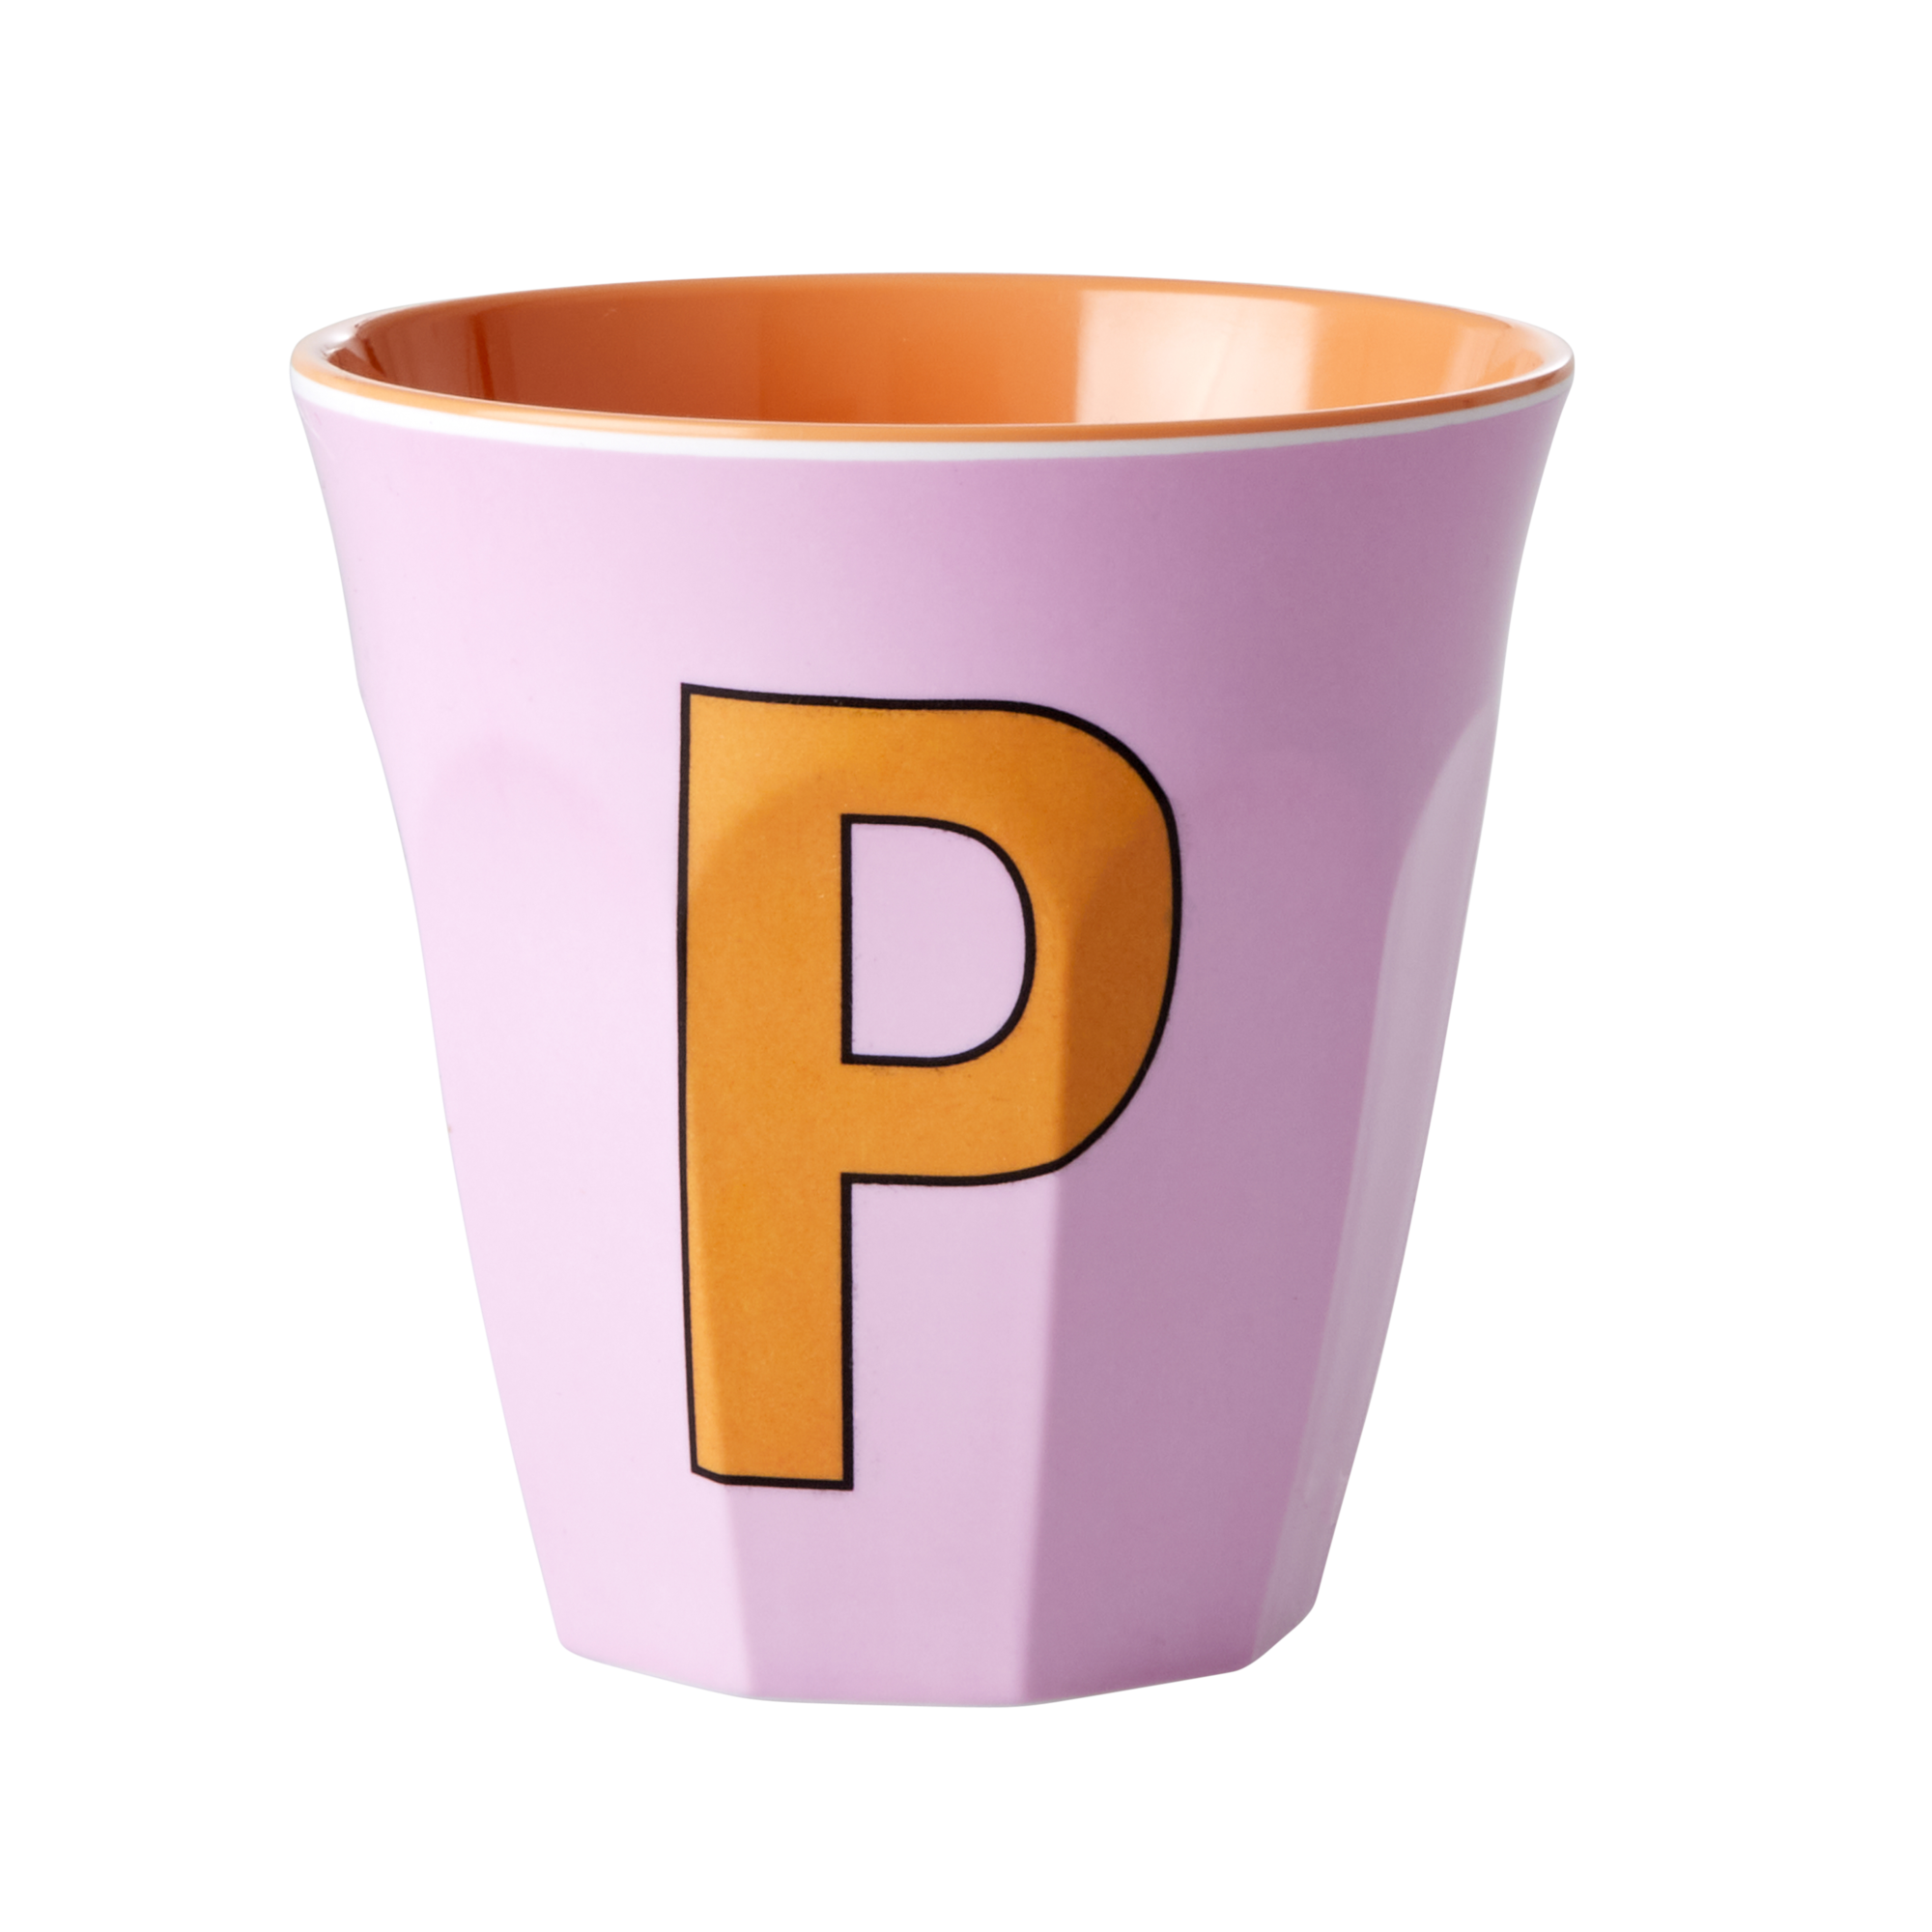 Melamine cup by Rice by Rice in the colors pink,  and orange with the letter "P"